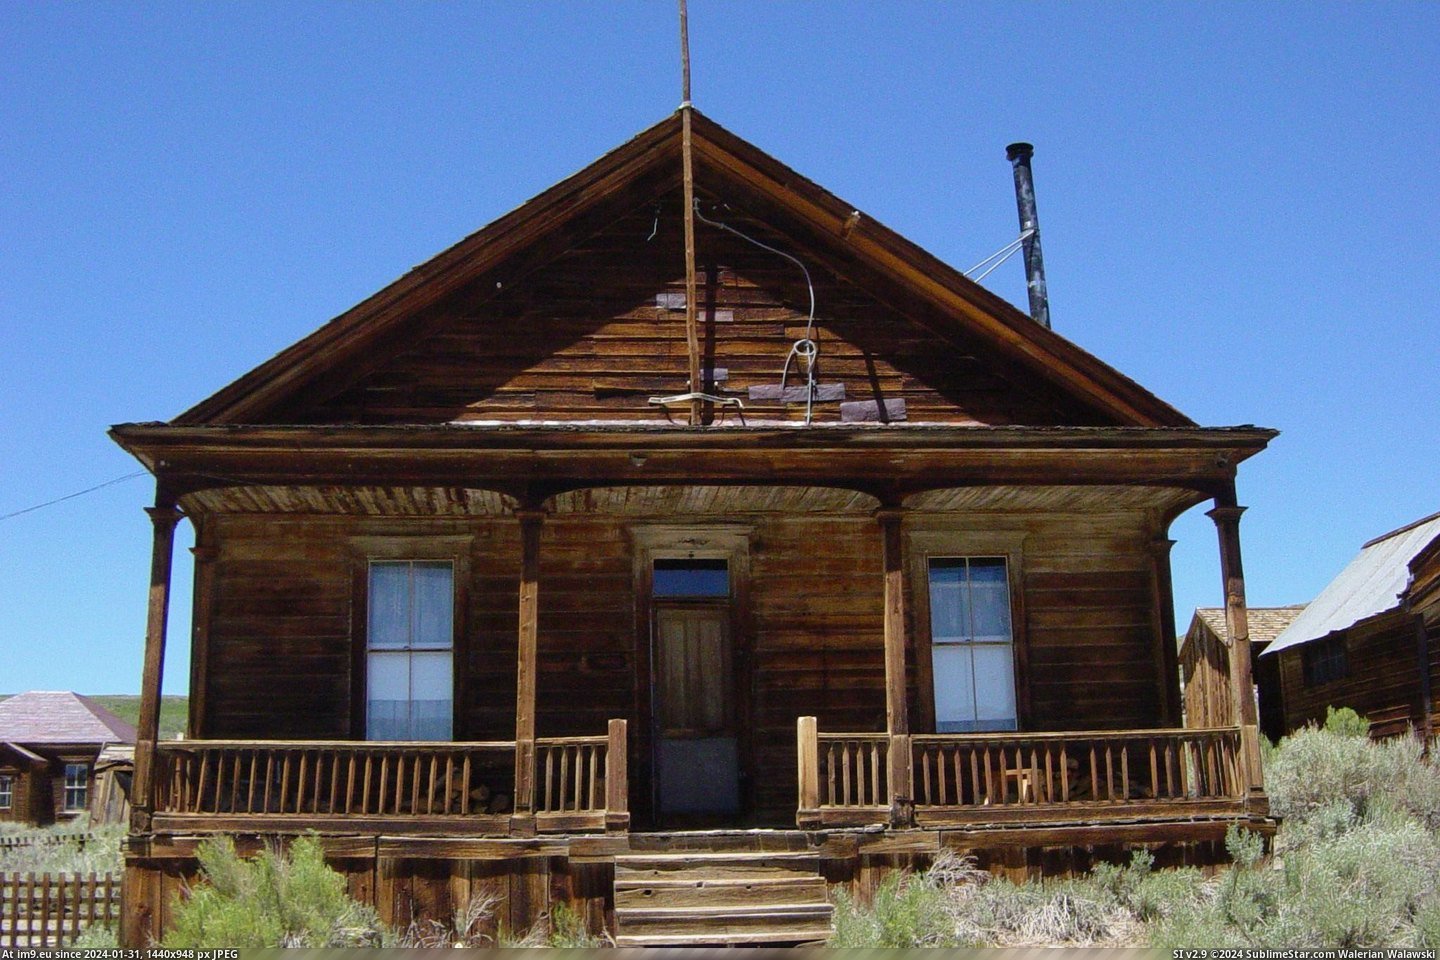 Seller House (in Bodie - a ghost town in Eastern California)